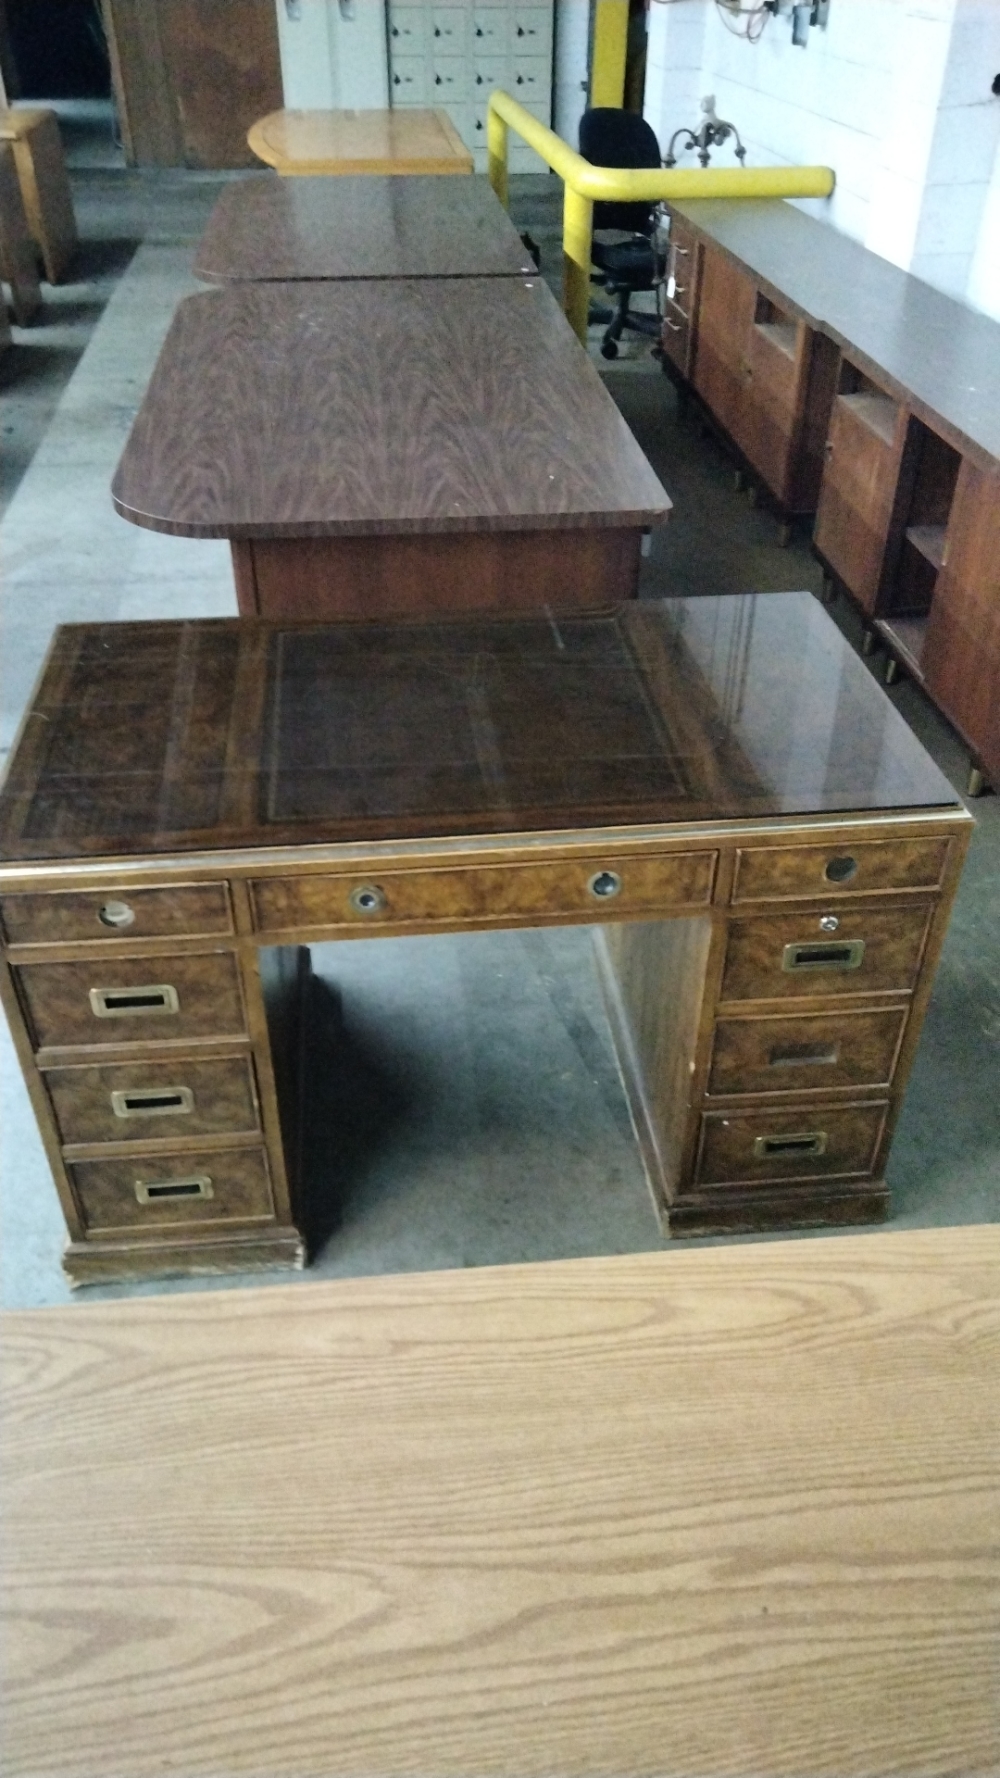  Golden desk w/smoked glass top